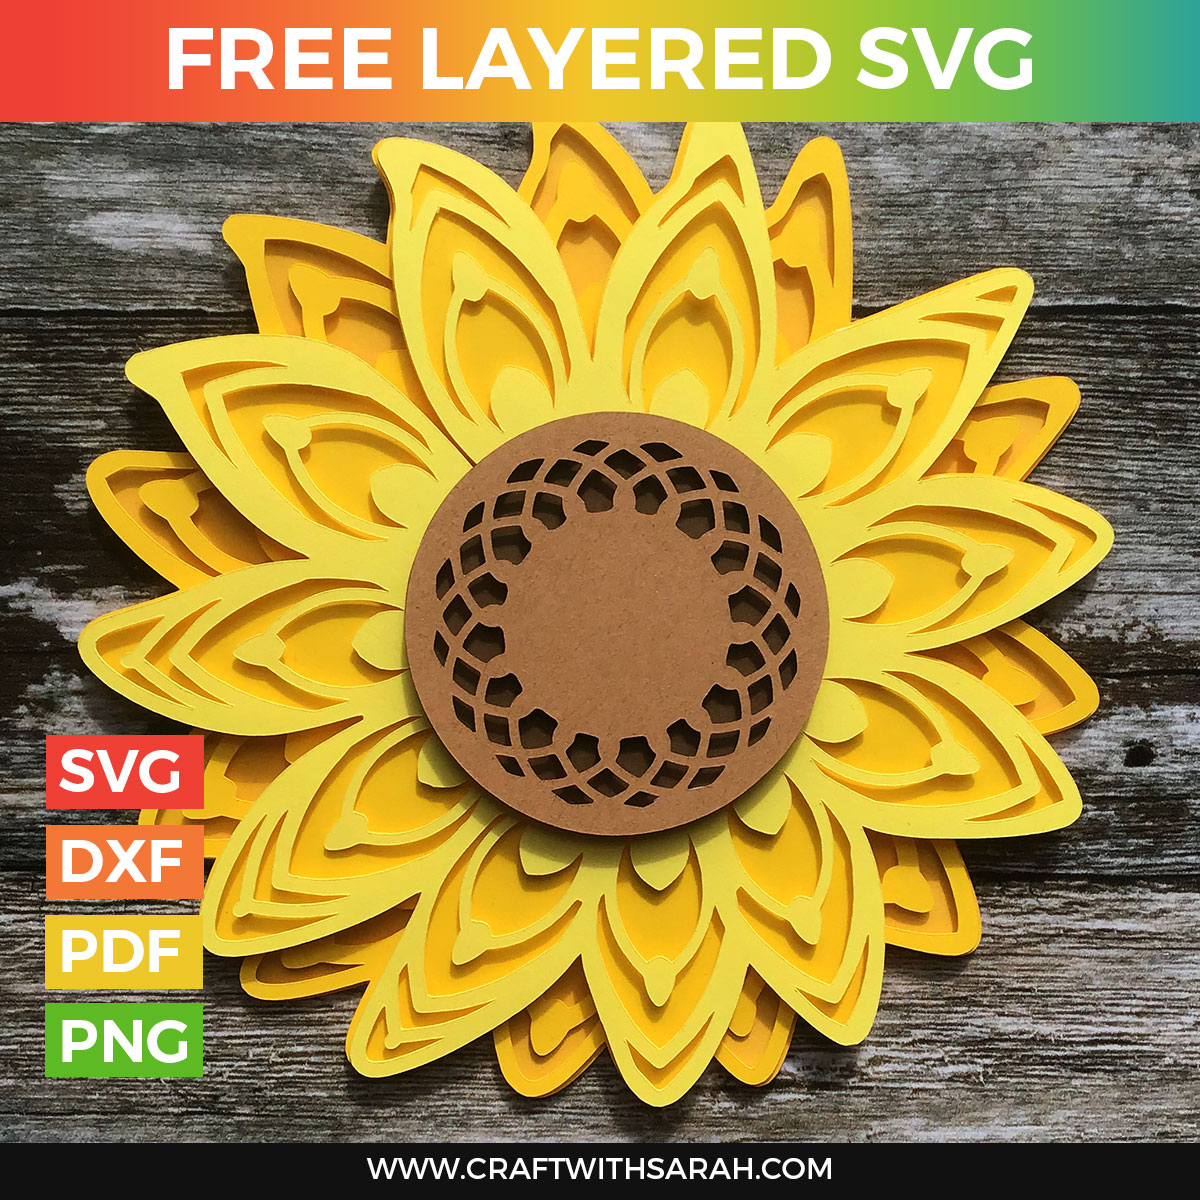 Download Sunflower Layered SVG | Craft With Sarah